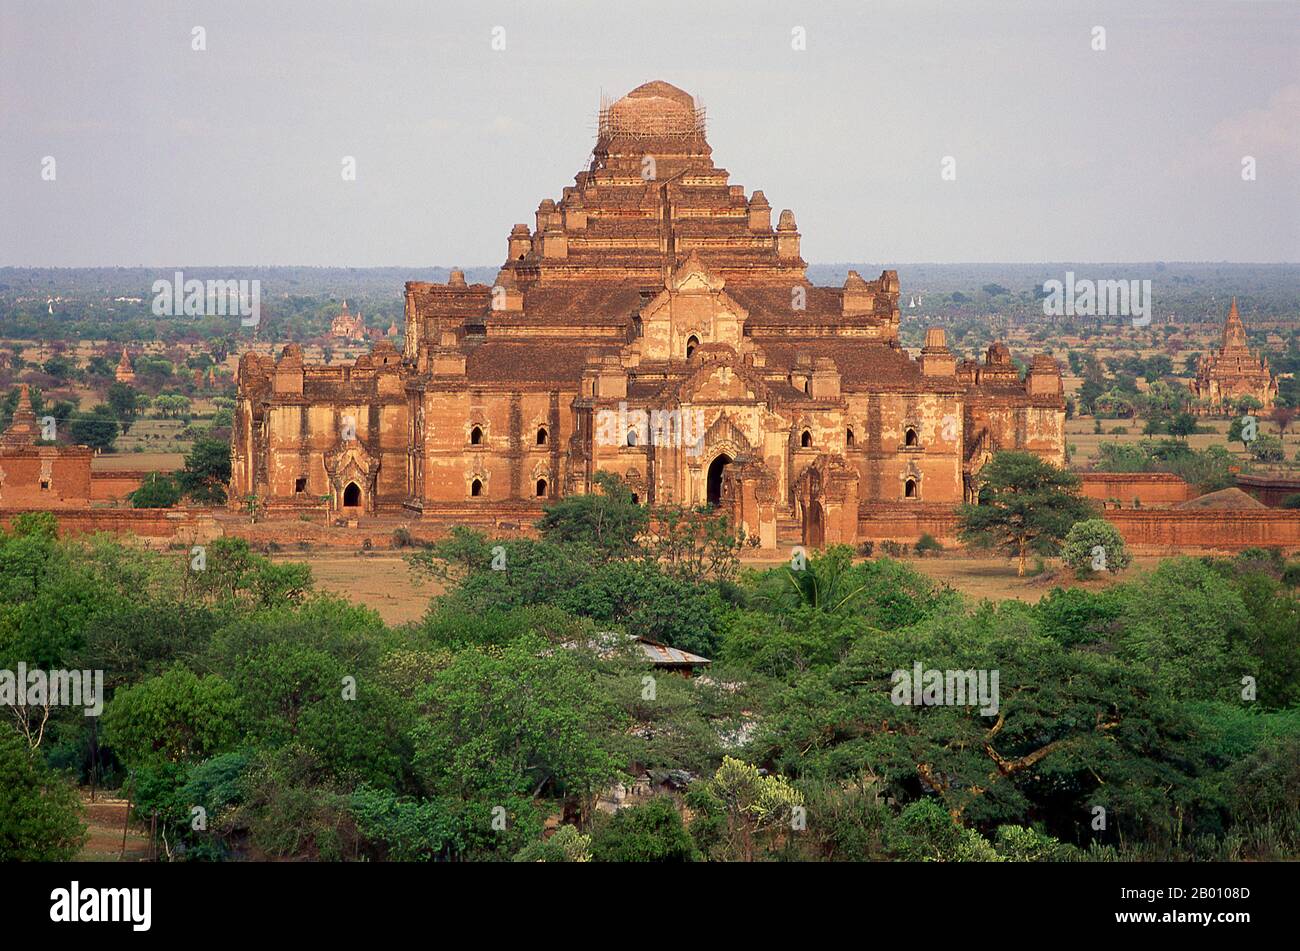 Burma: Dhammayangyi Temple, Bagan (Pagan) Ancient City.  Dhammayangyi Temple is the largest temple in Bagan and was built during the reign of King Narathu (1167-1170).  Bagan, formerly Pagan, was mainly built between the 11th century and 13th century. Formally titled Arimaddanapura or Arimaddana (the City of the Enemy Crusher) and also known as Tambadipa (the Land of Copper) or Tassadessa (the Parched Land), it was the capital of several ancient kingdoms in Burma. Stock Photo